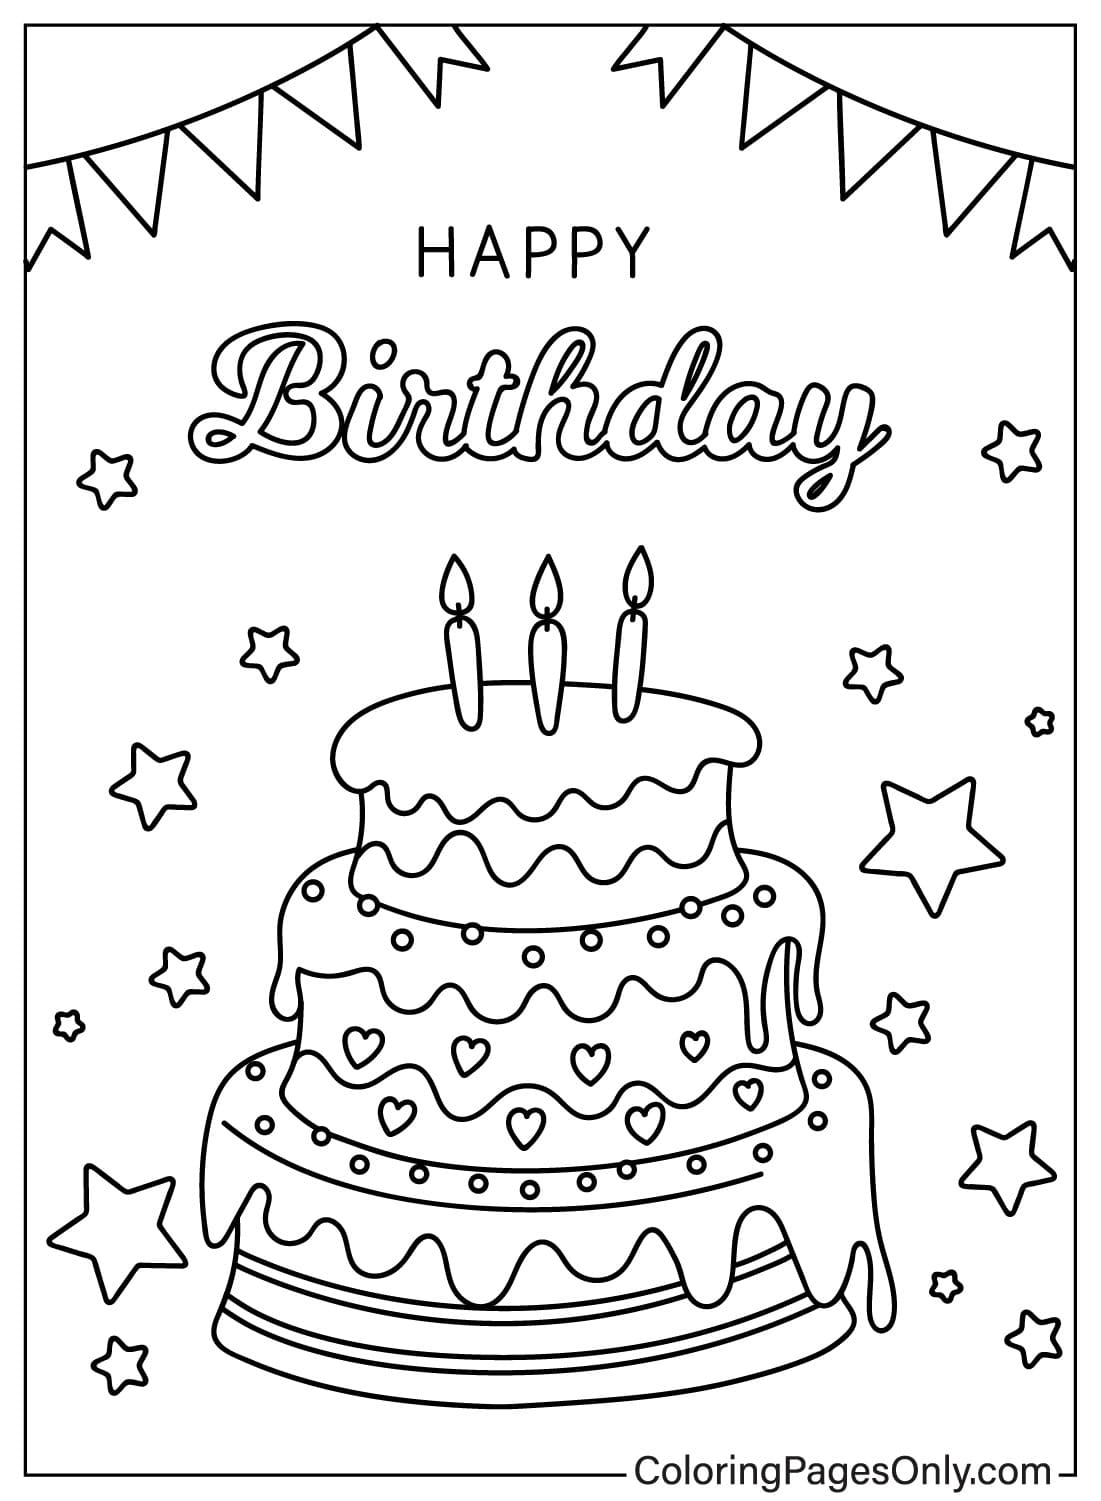 Birthday Cake Coloring Page from Birthday Cake